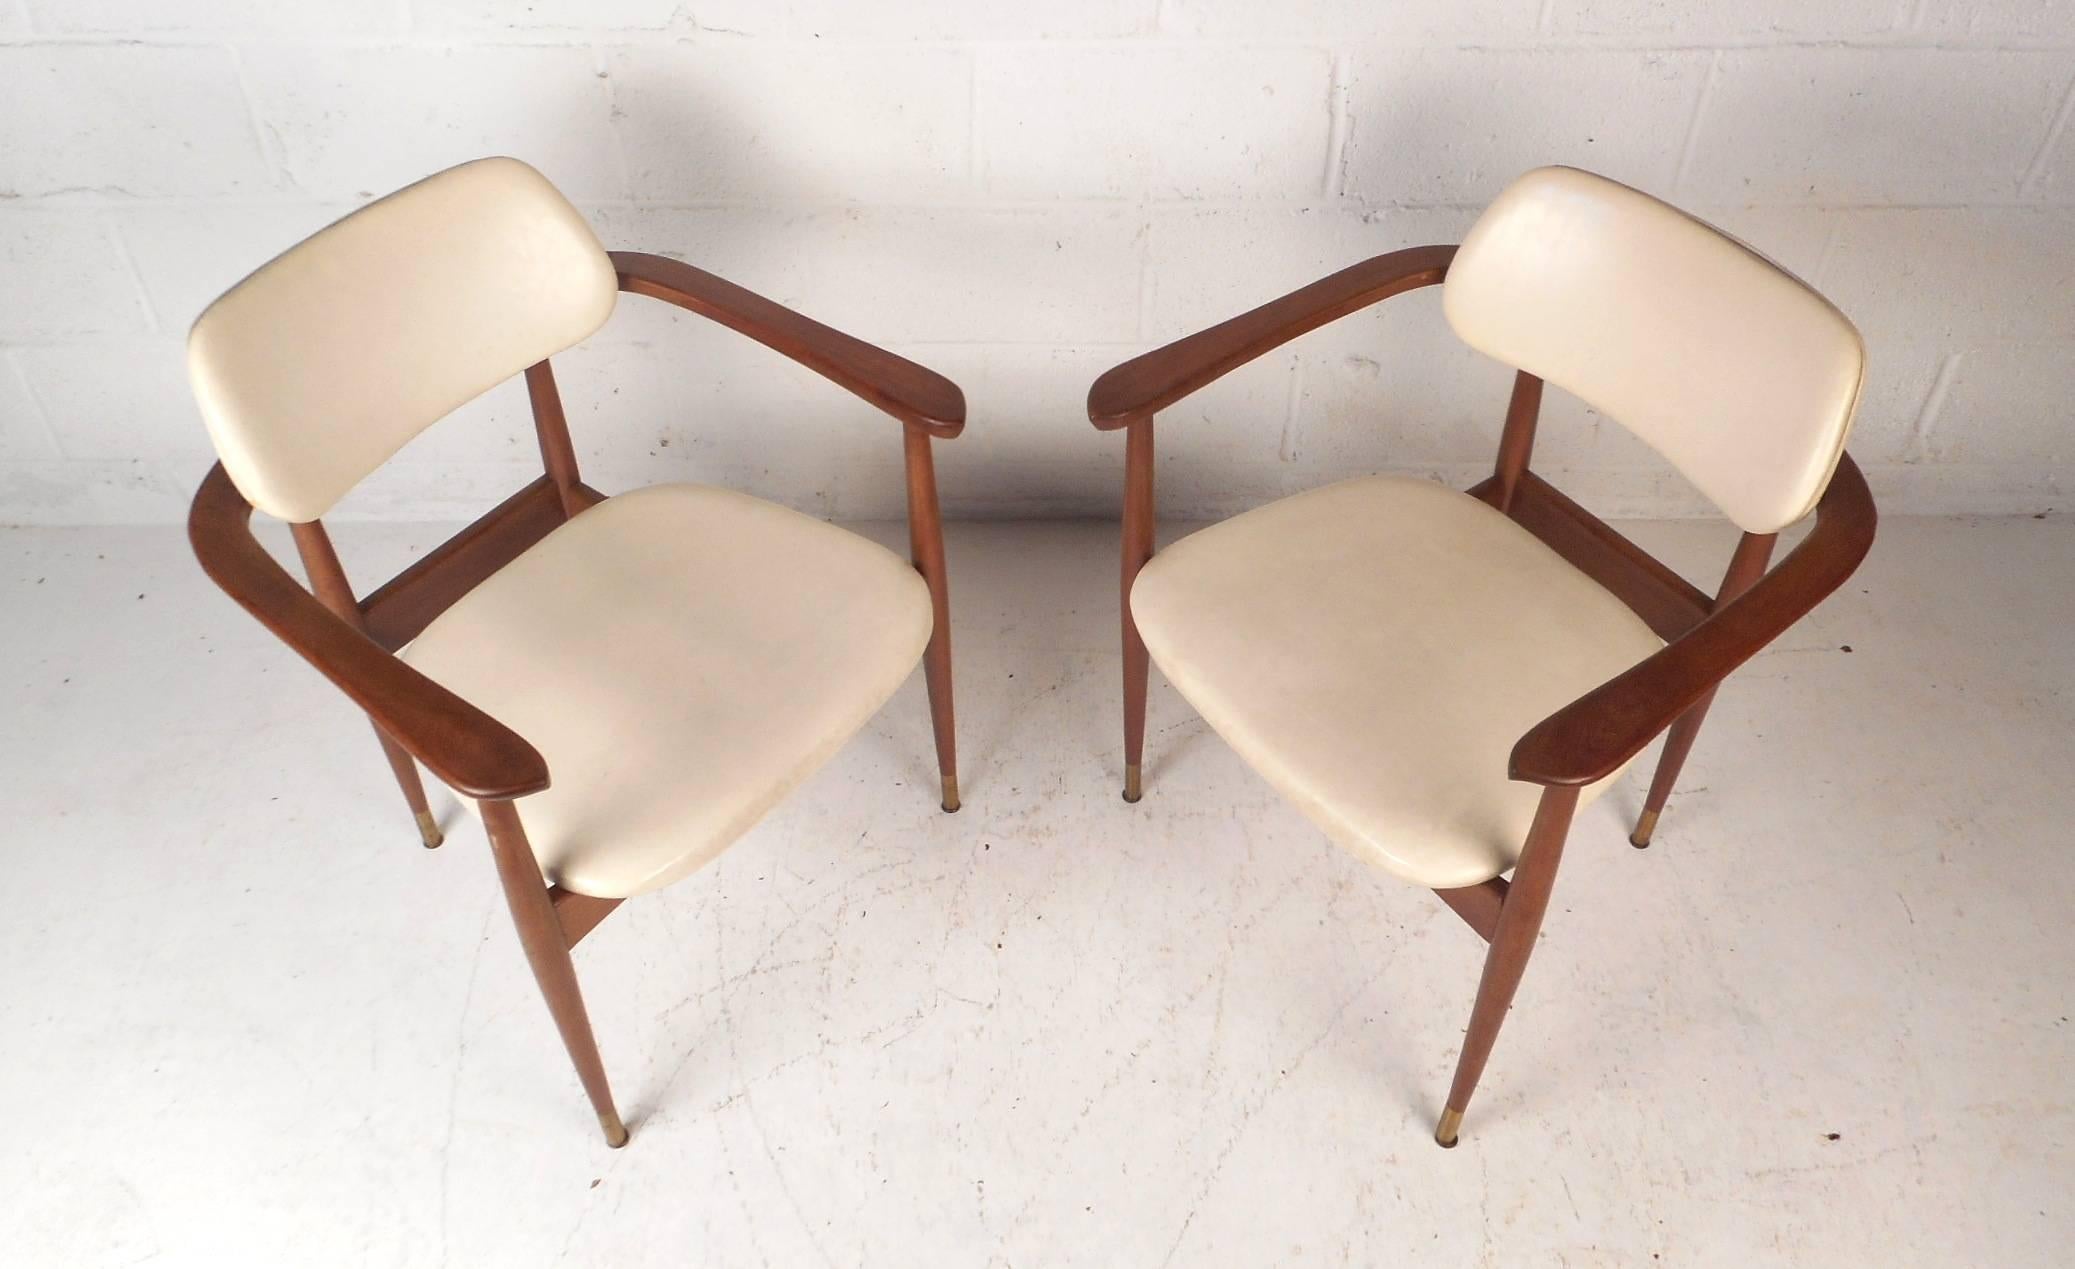 This stunning pair of vintage modern chairs feature sculpted arm rests, a floating style backrest, and tapered legs. The sleek and comfortable design has thick padded seats covered in white vinyl. This attractive pair of side chairs have brass